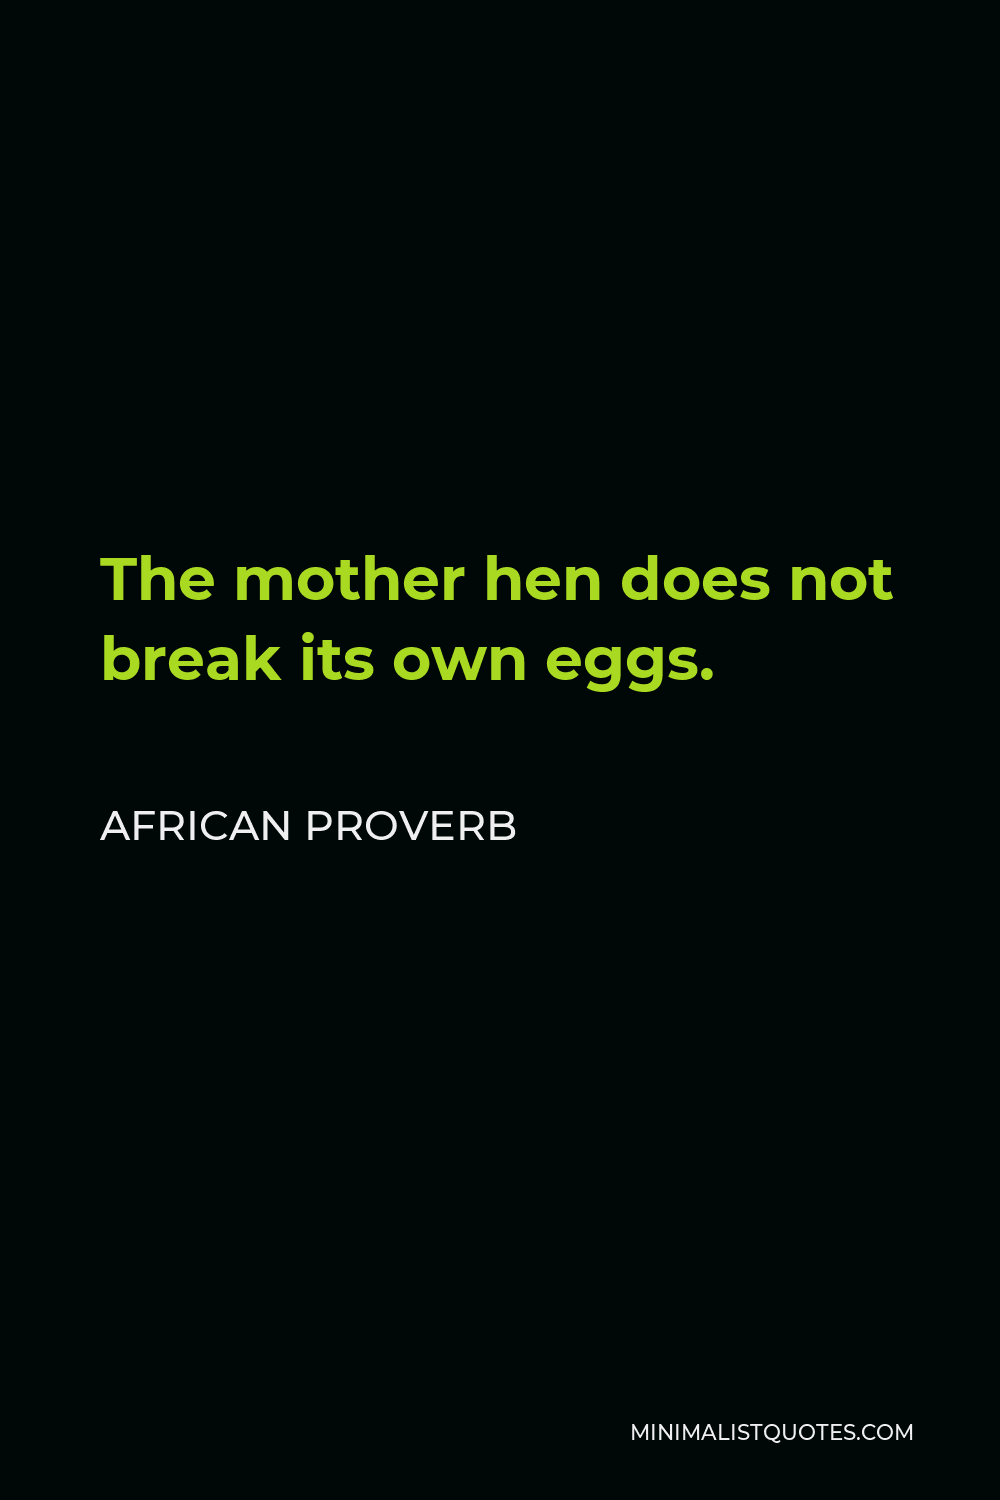 African Proverb Quote - The mother hen does not break its own eggs.